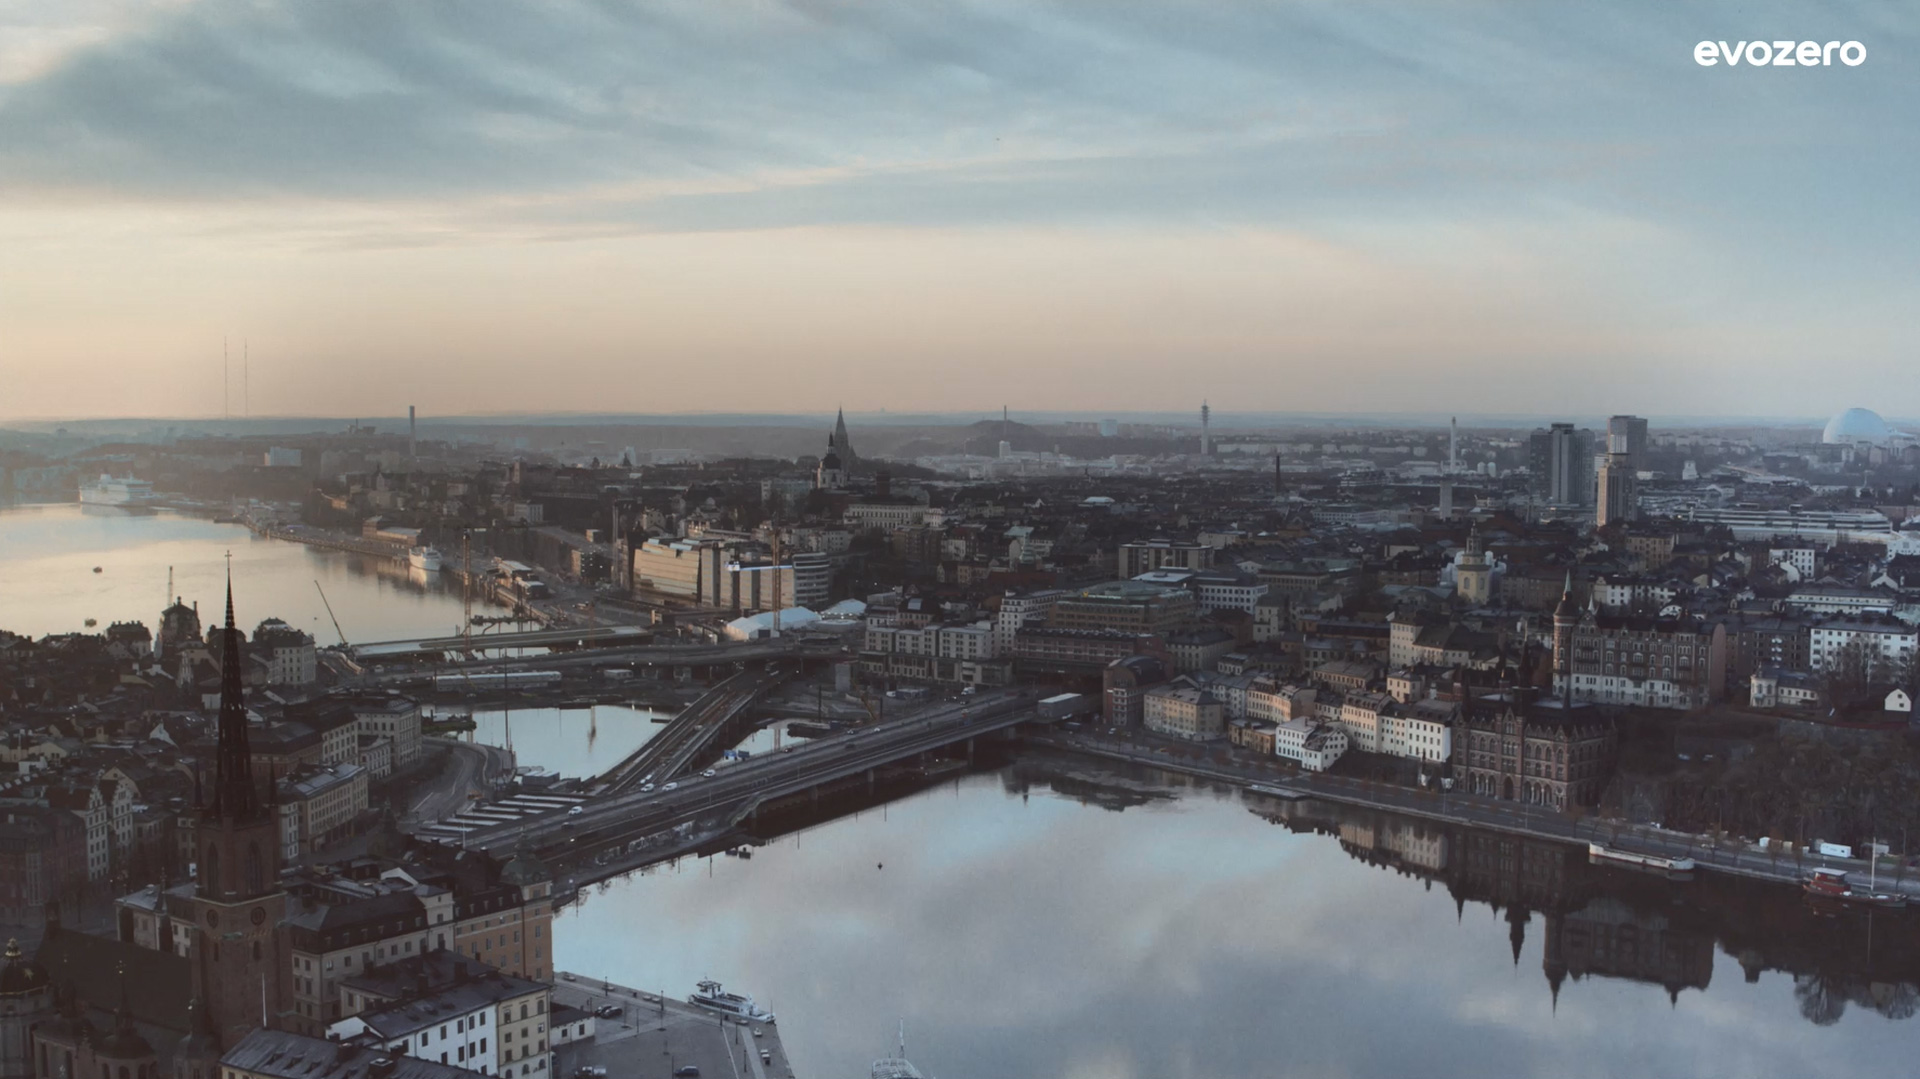 Aerial view of Stockholm at twilight with water, bridges, and buildings